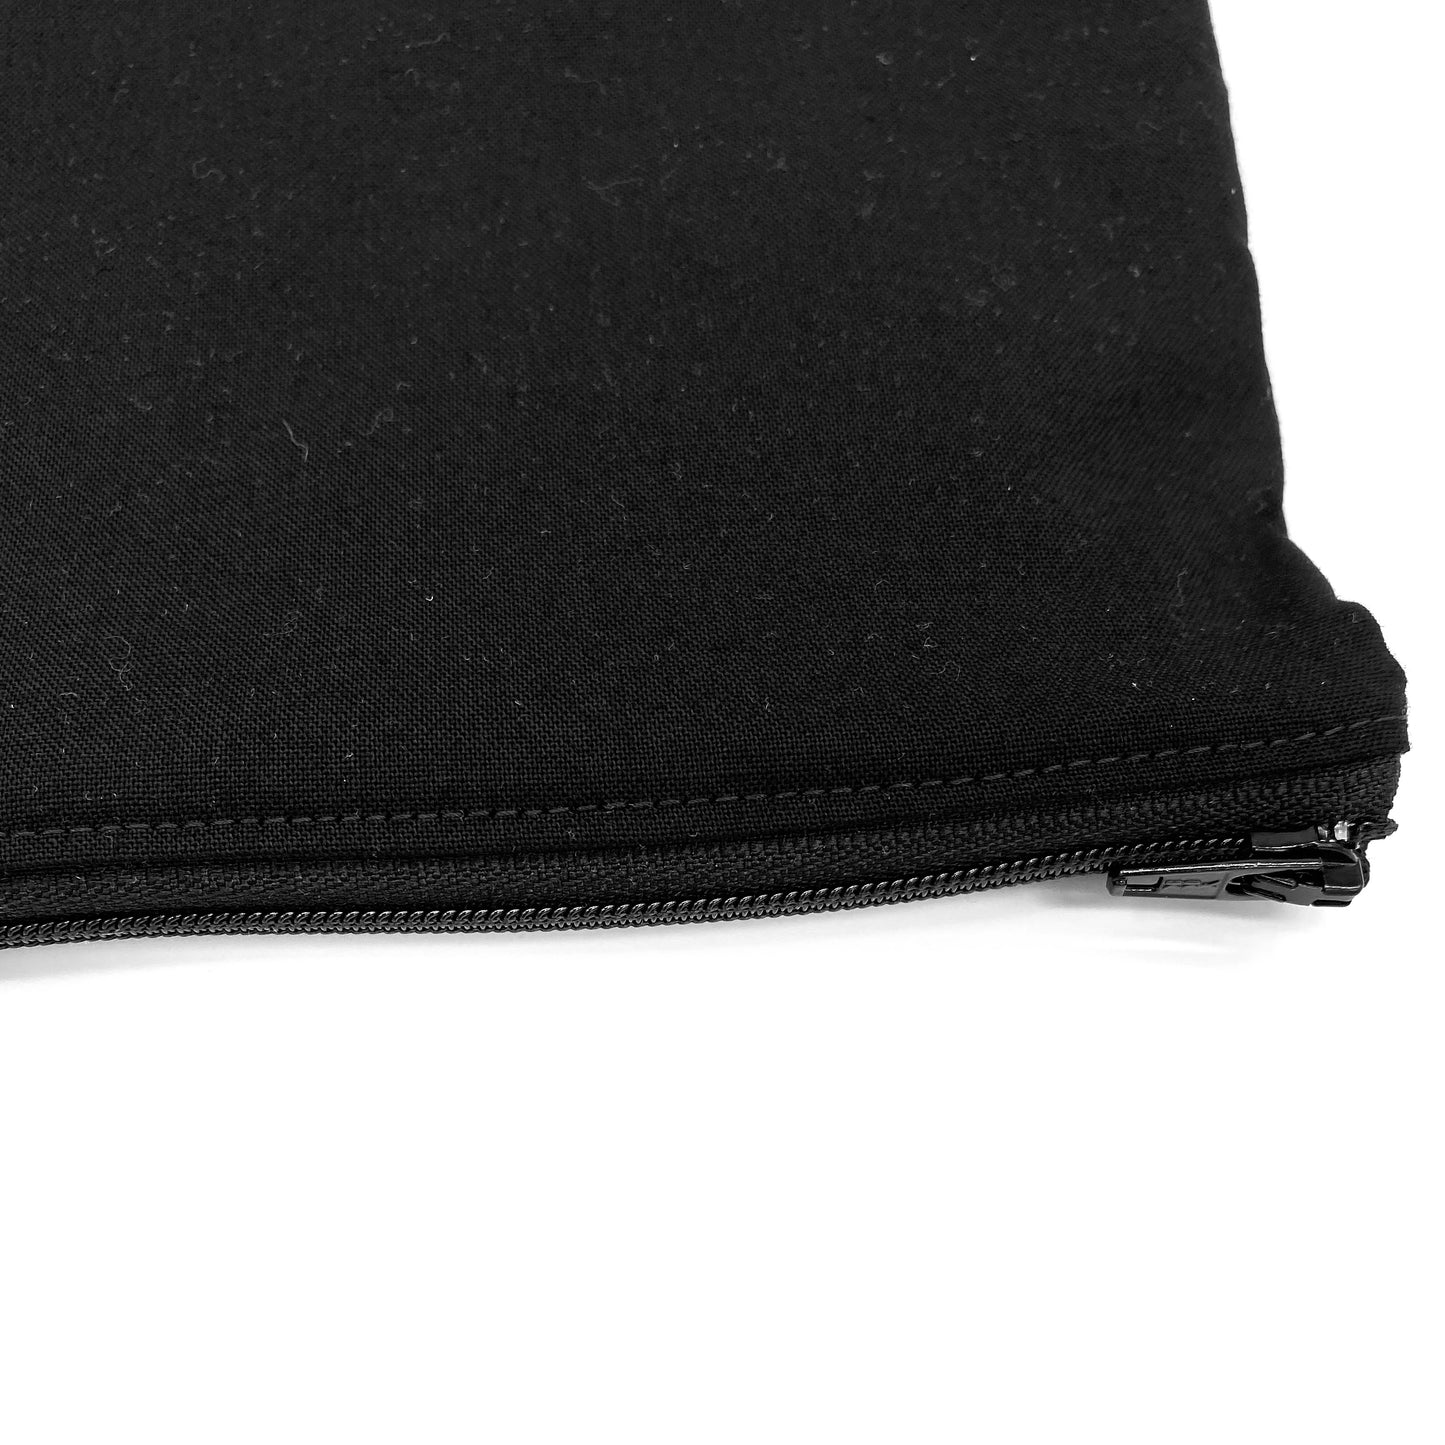 Sandwich Sized Reusable Zippered Bag Solid Black